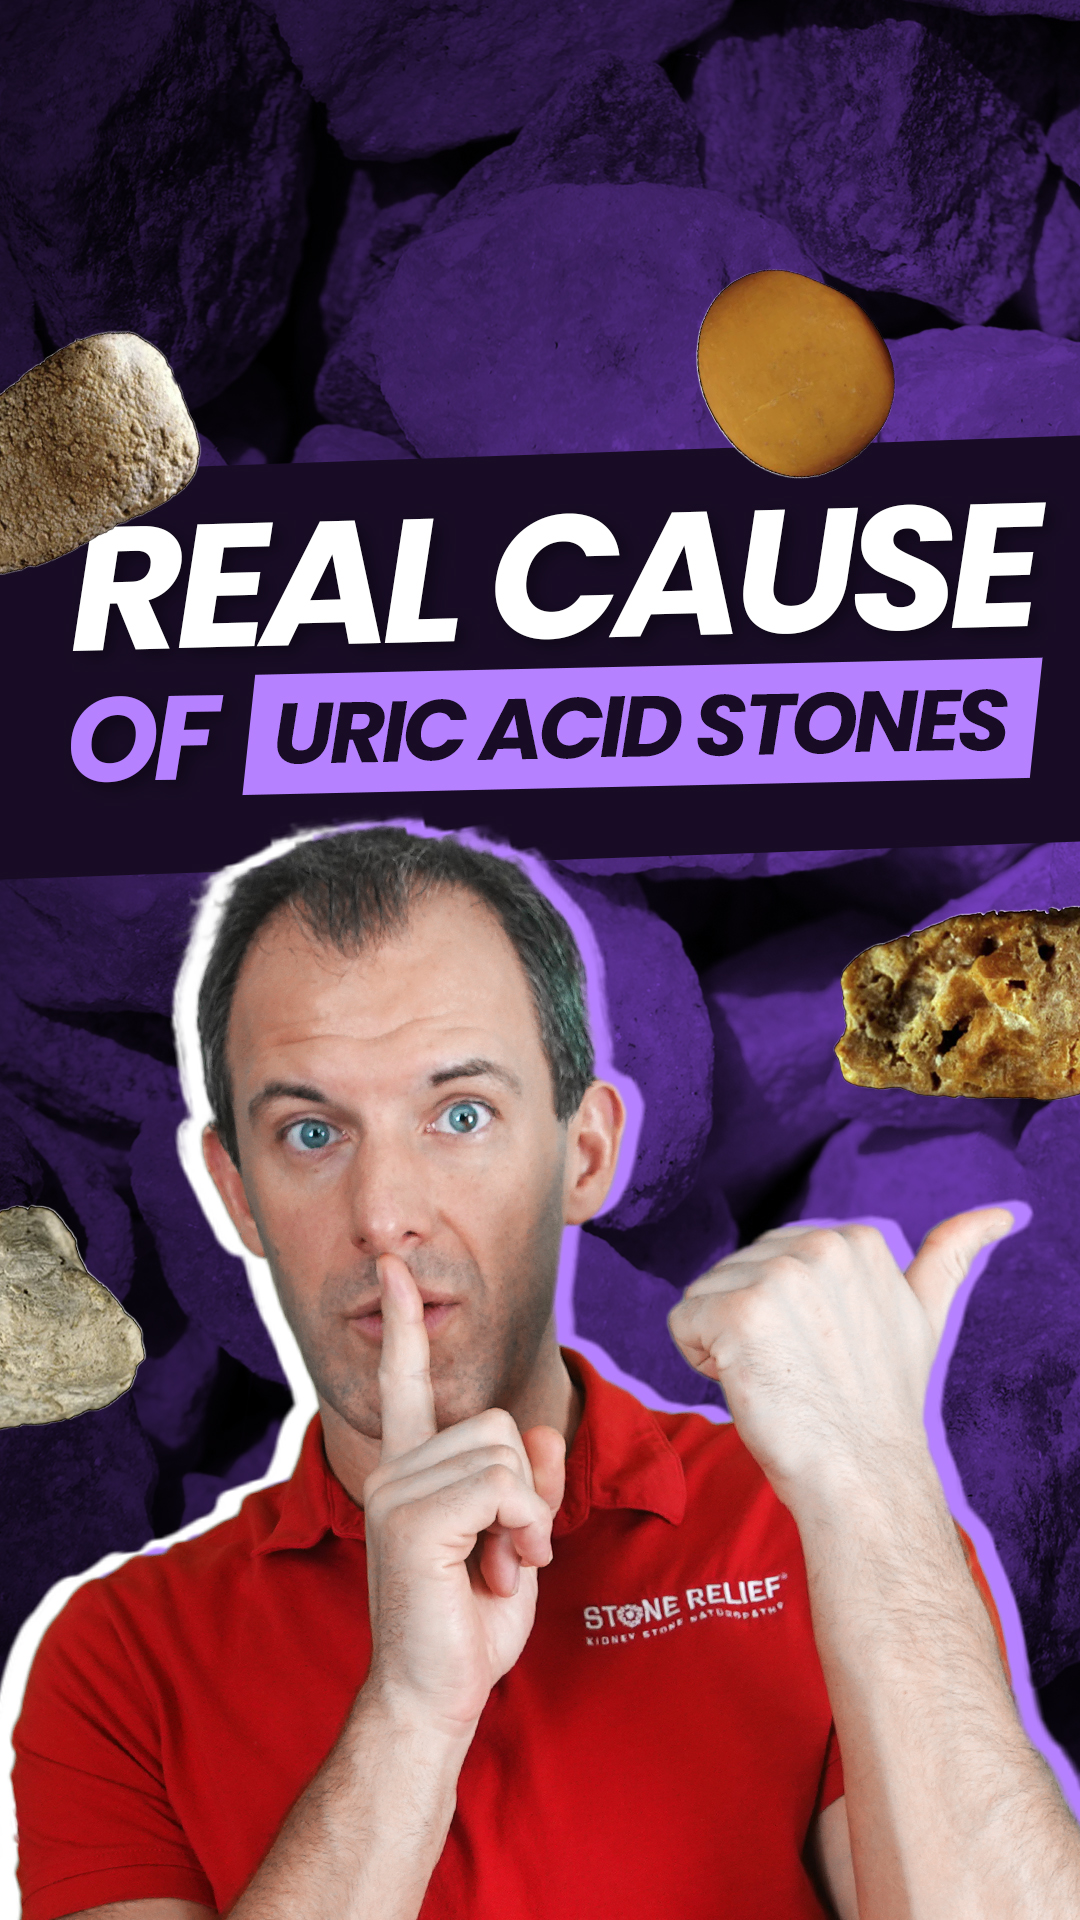 The REAL Cause of Uric Acid stones!